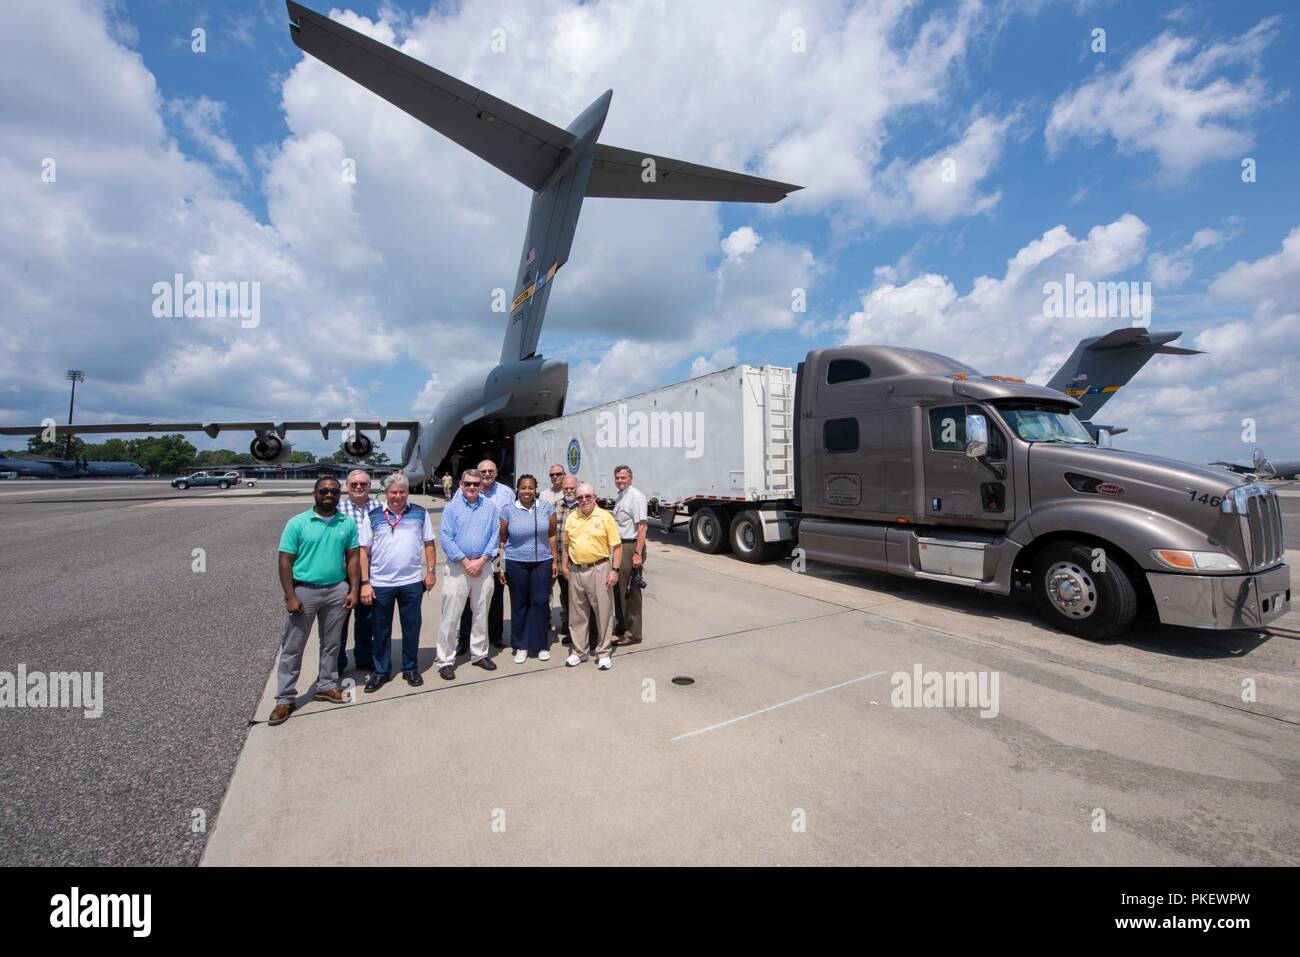 Charleston, S.C. (26 July, 2018) Space and Naval Warfare Systems Center (SSC) Atlantic engineers and officials from the Federal Aviation Administration pause for a photo following a test load of a Large Mobile Air Traffic Control Tower (LMATCT) onto a C-17 Globemaster III July 26 at the Joint Base Charleston - Air Base. The test load was conducted in coordination with the 437th Aerial Port Squadron to validate the Air Transportability Test Loading Activity certification and ensure the newly constructed towers were compatible for airlift aboard U.S. Air Force aircraft. Stock Photo